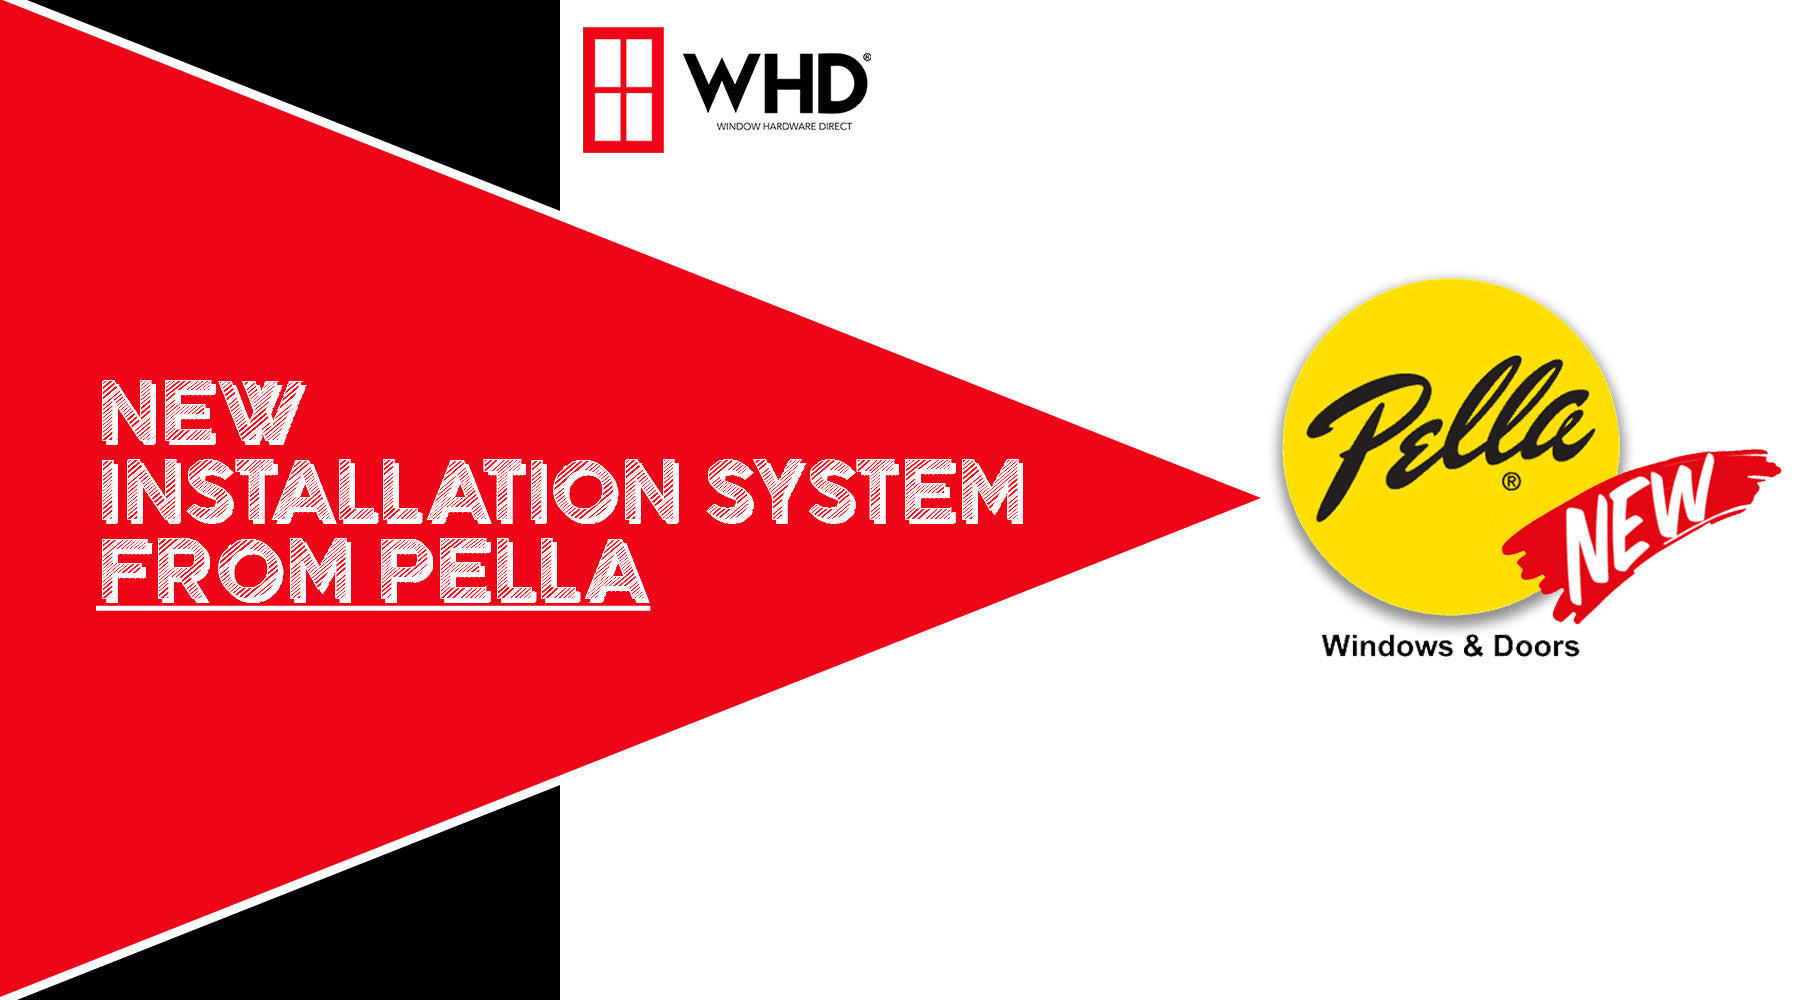 Pella's New Installation System - A Promising Innovation for Homeowners